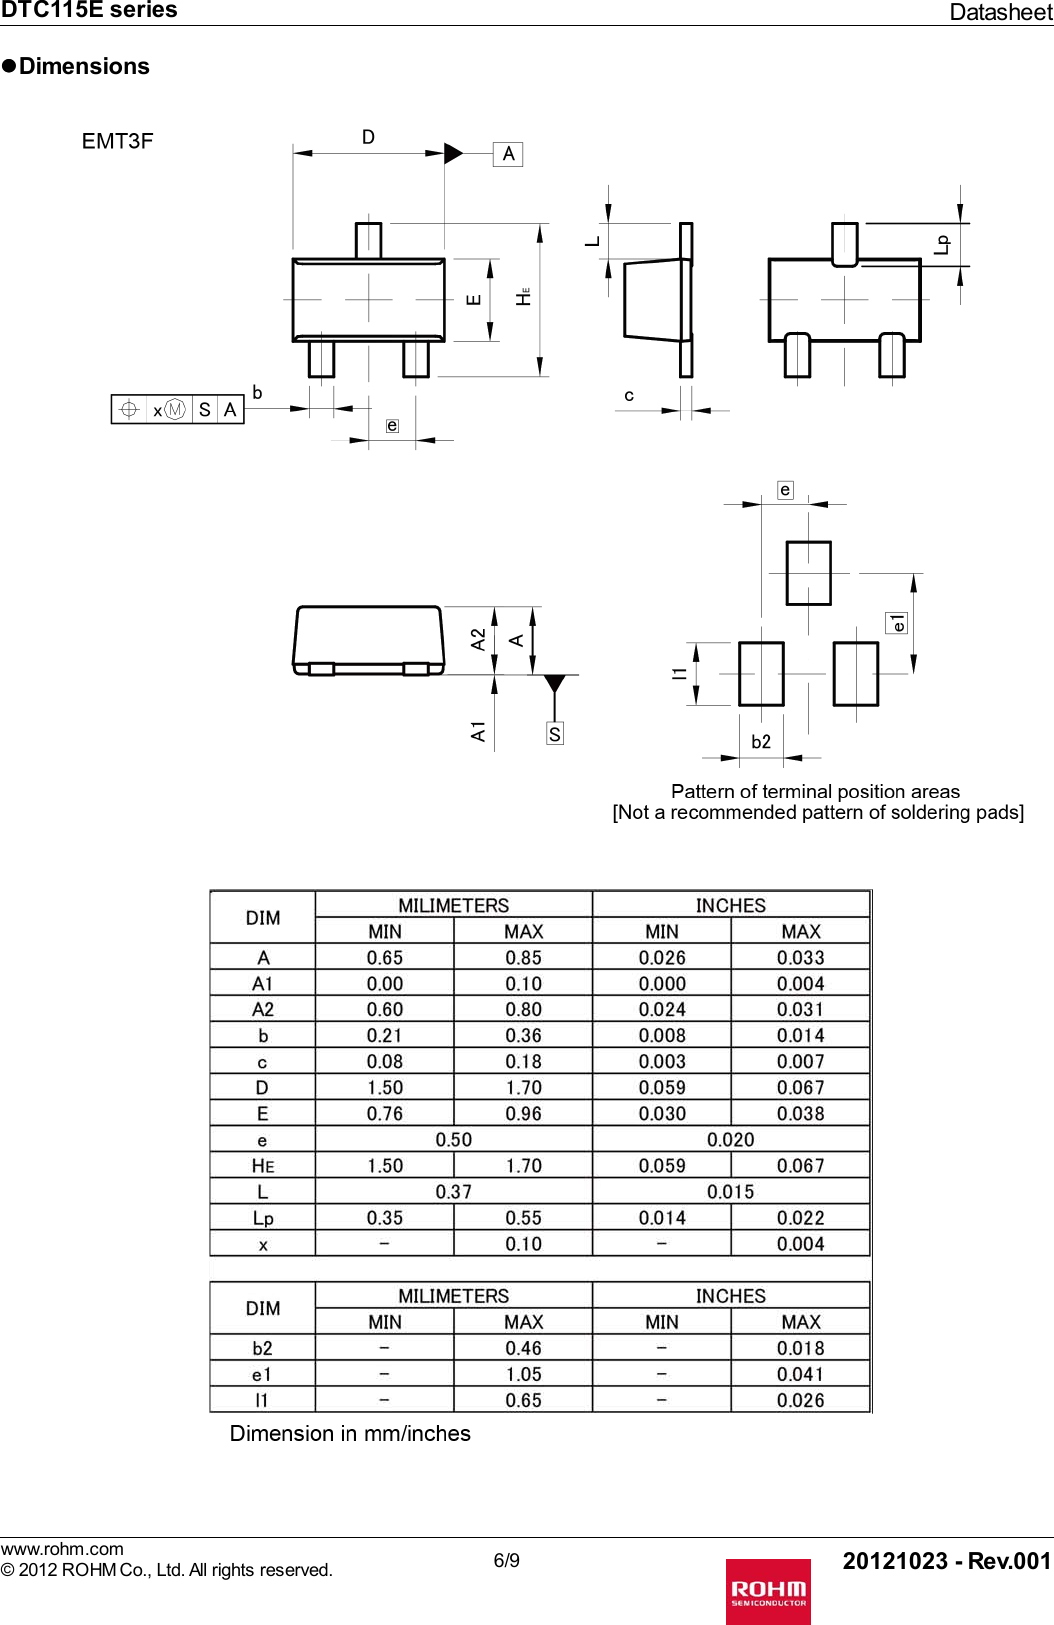 Page 6 of 11 - DTC115E Series - Datasheet. Www.s-manuals.com. Rohm